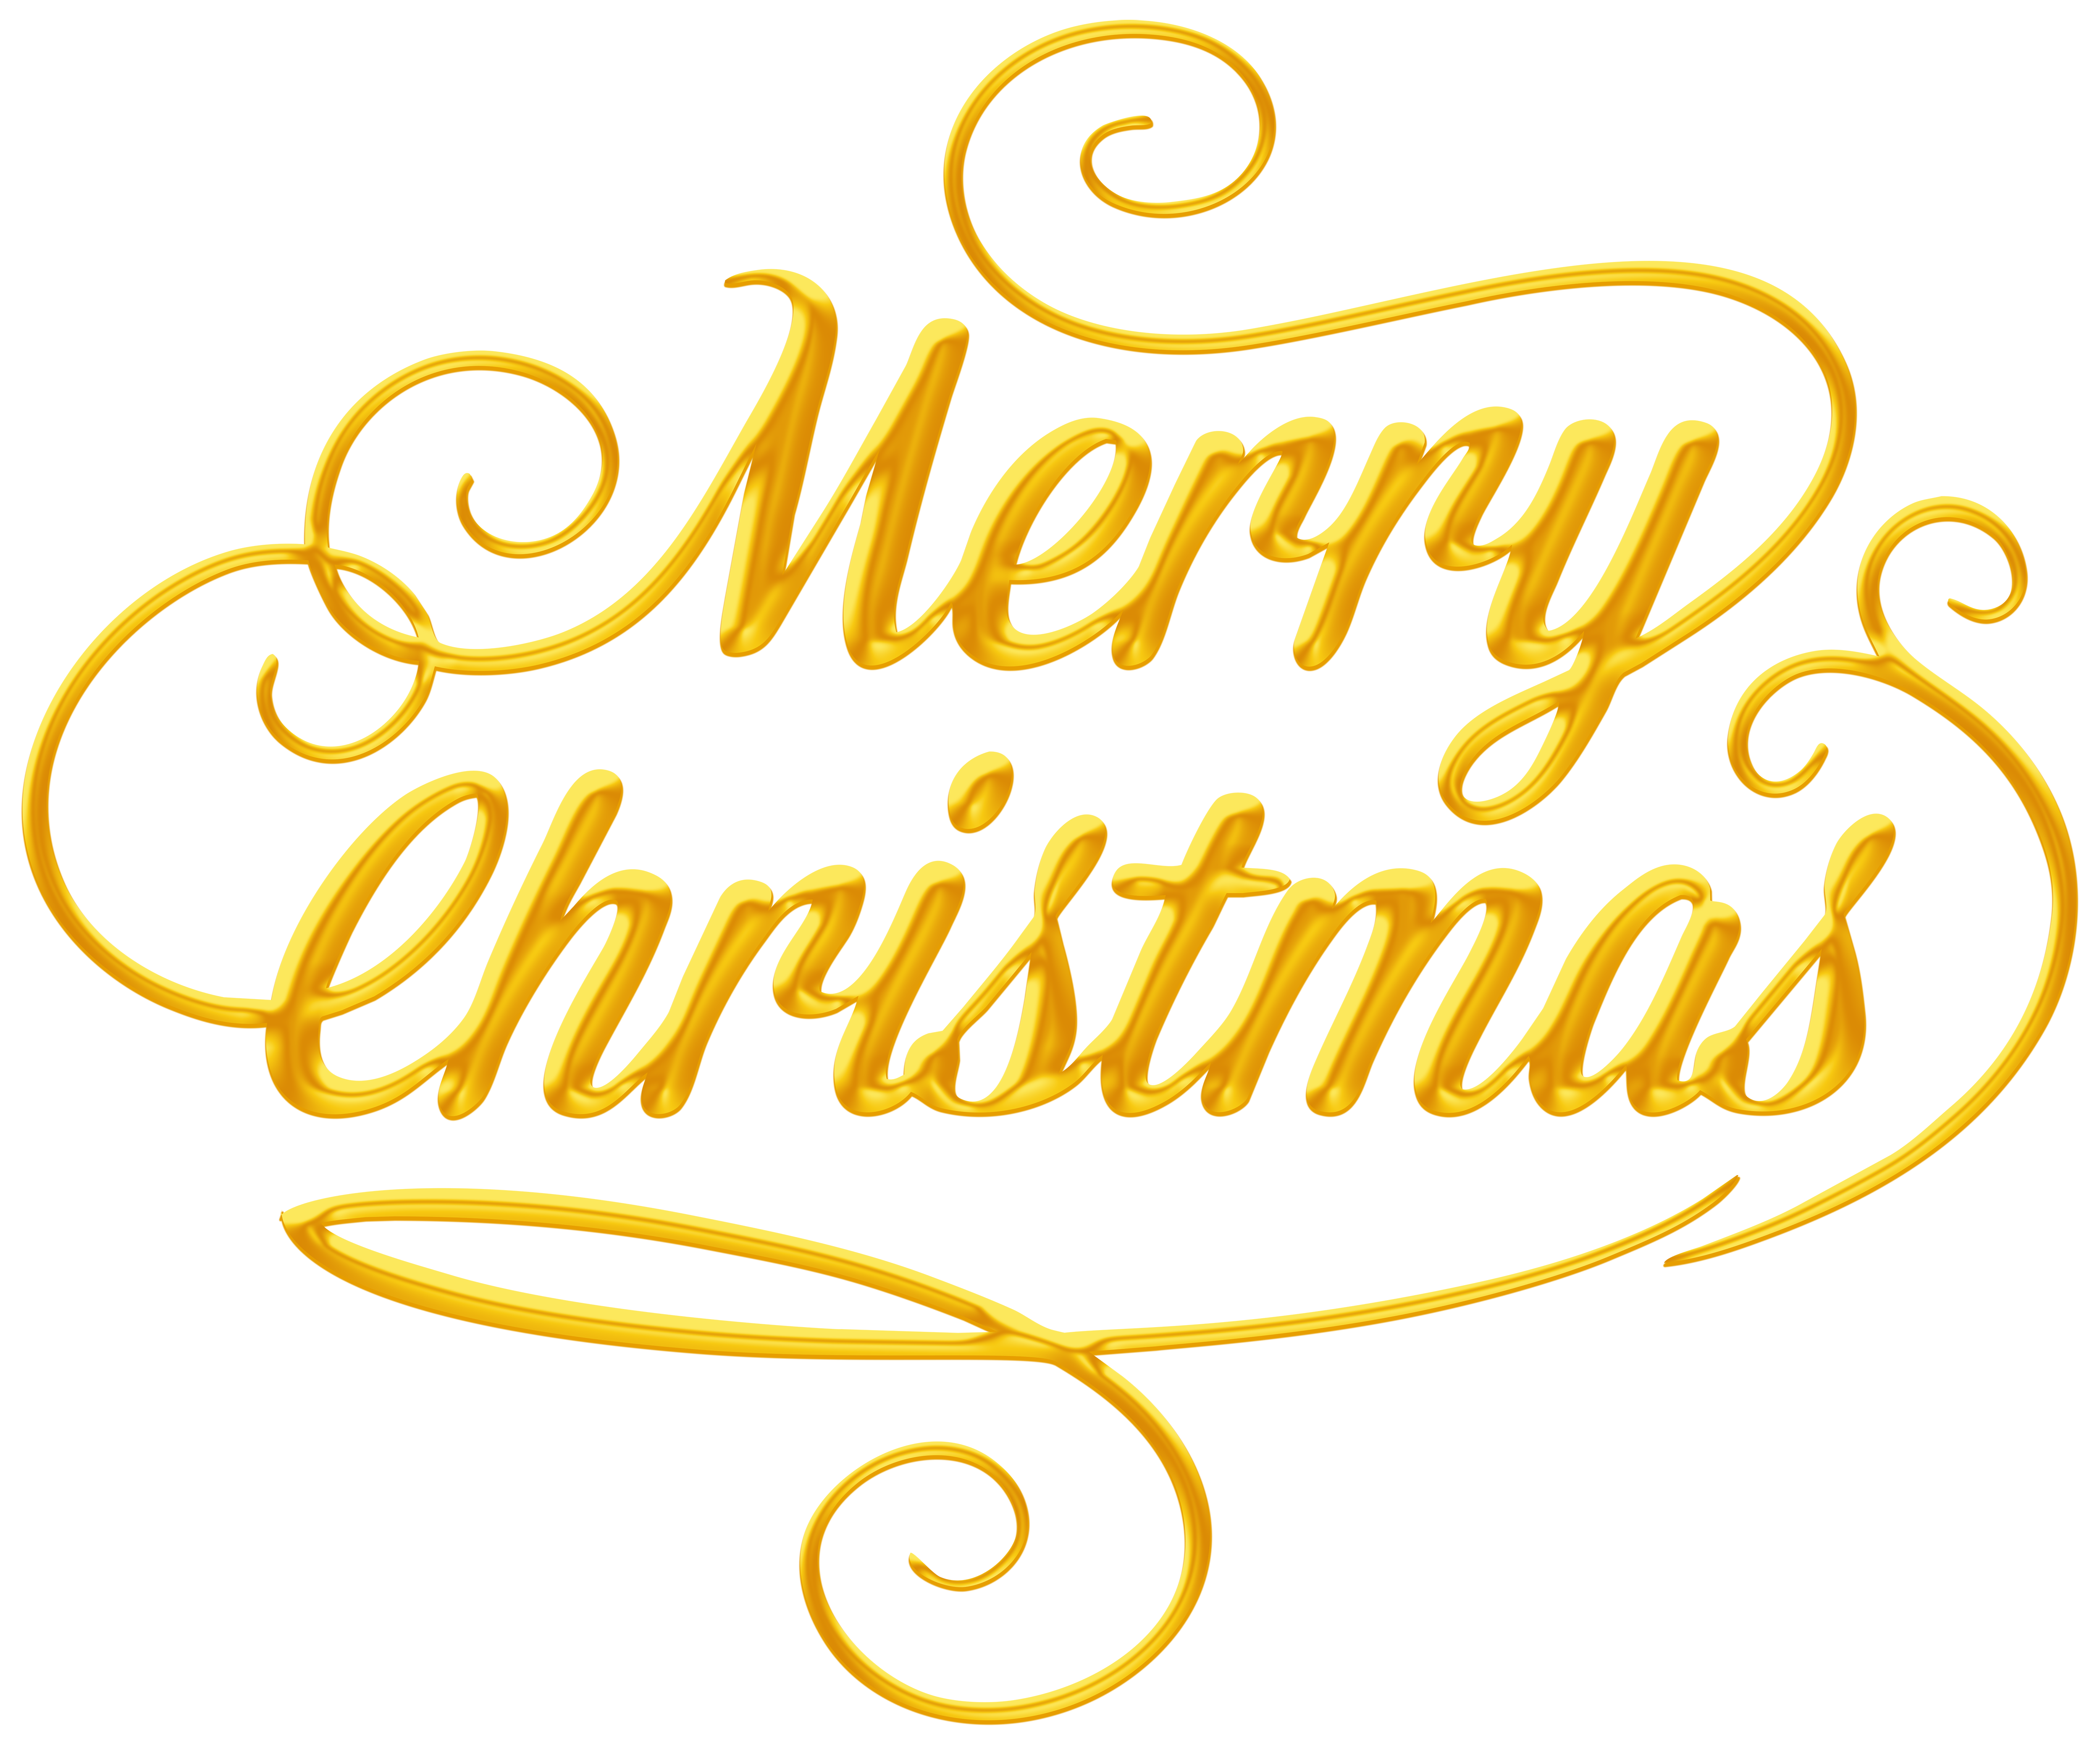 Gold Merry Christmas Text PNG HQ Image Transparent Background